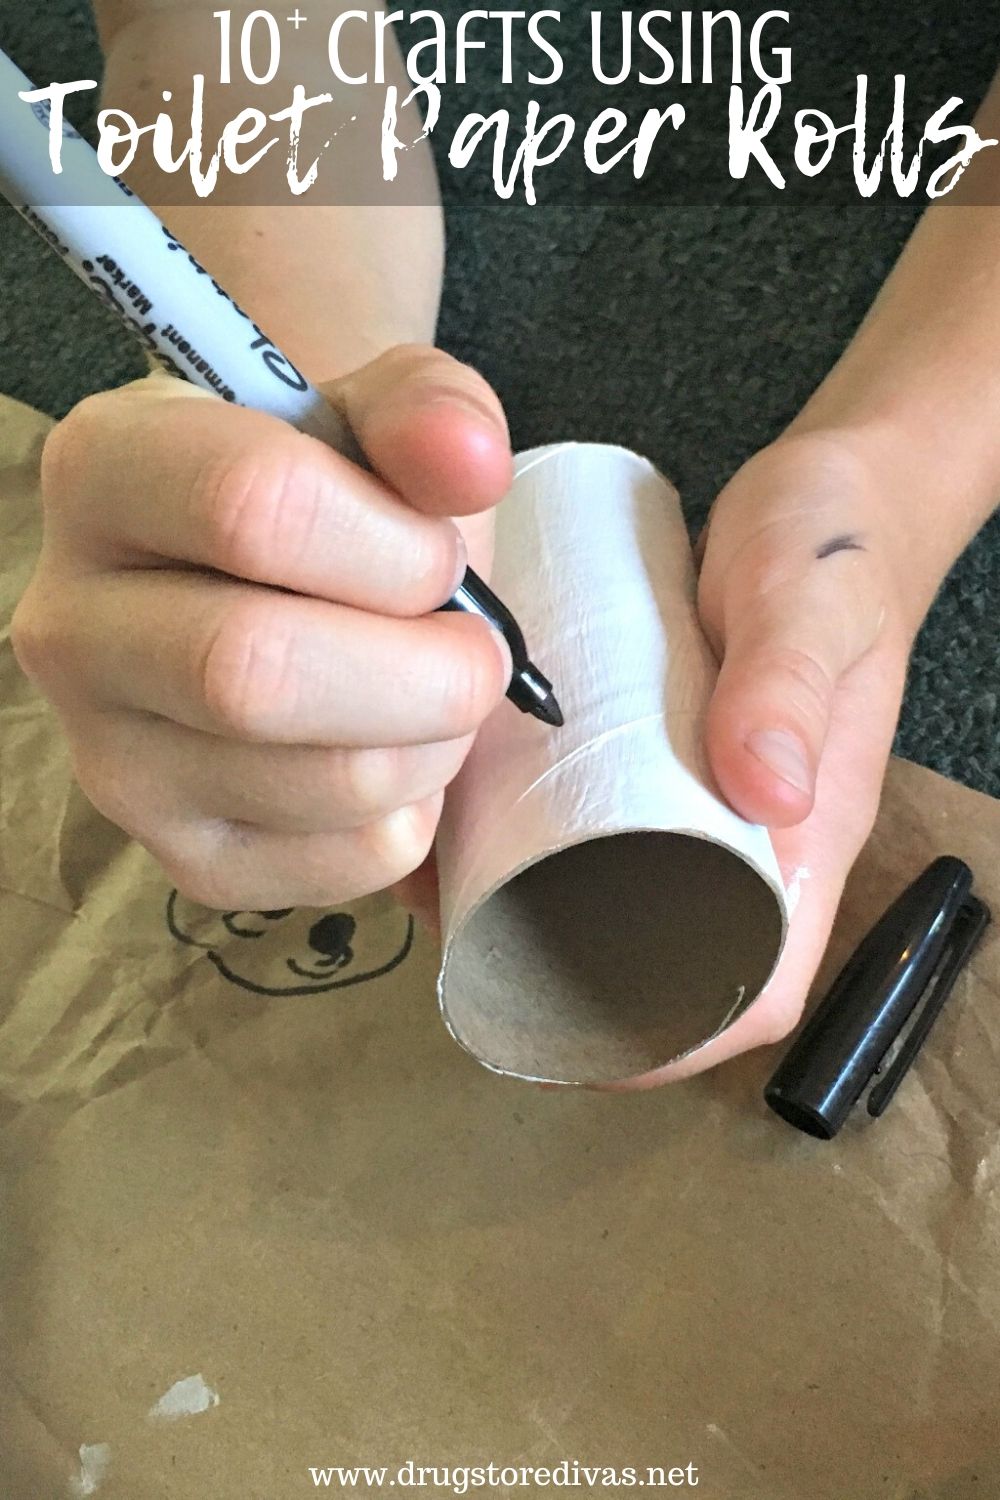 Kid drawing on a toilet paper roll with a marker and the words "10+ Crafts Using Toilet Paper Rolls" digitally written on top.